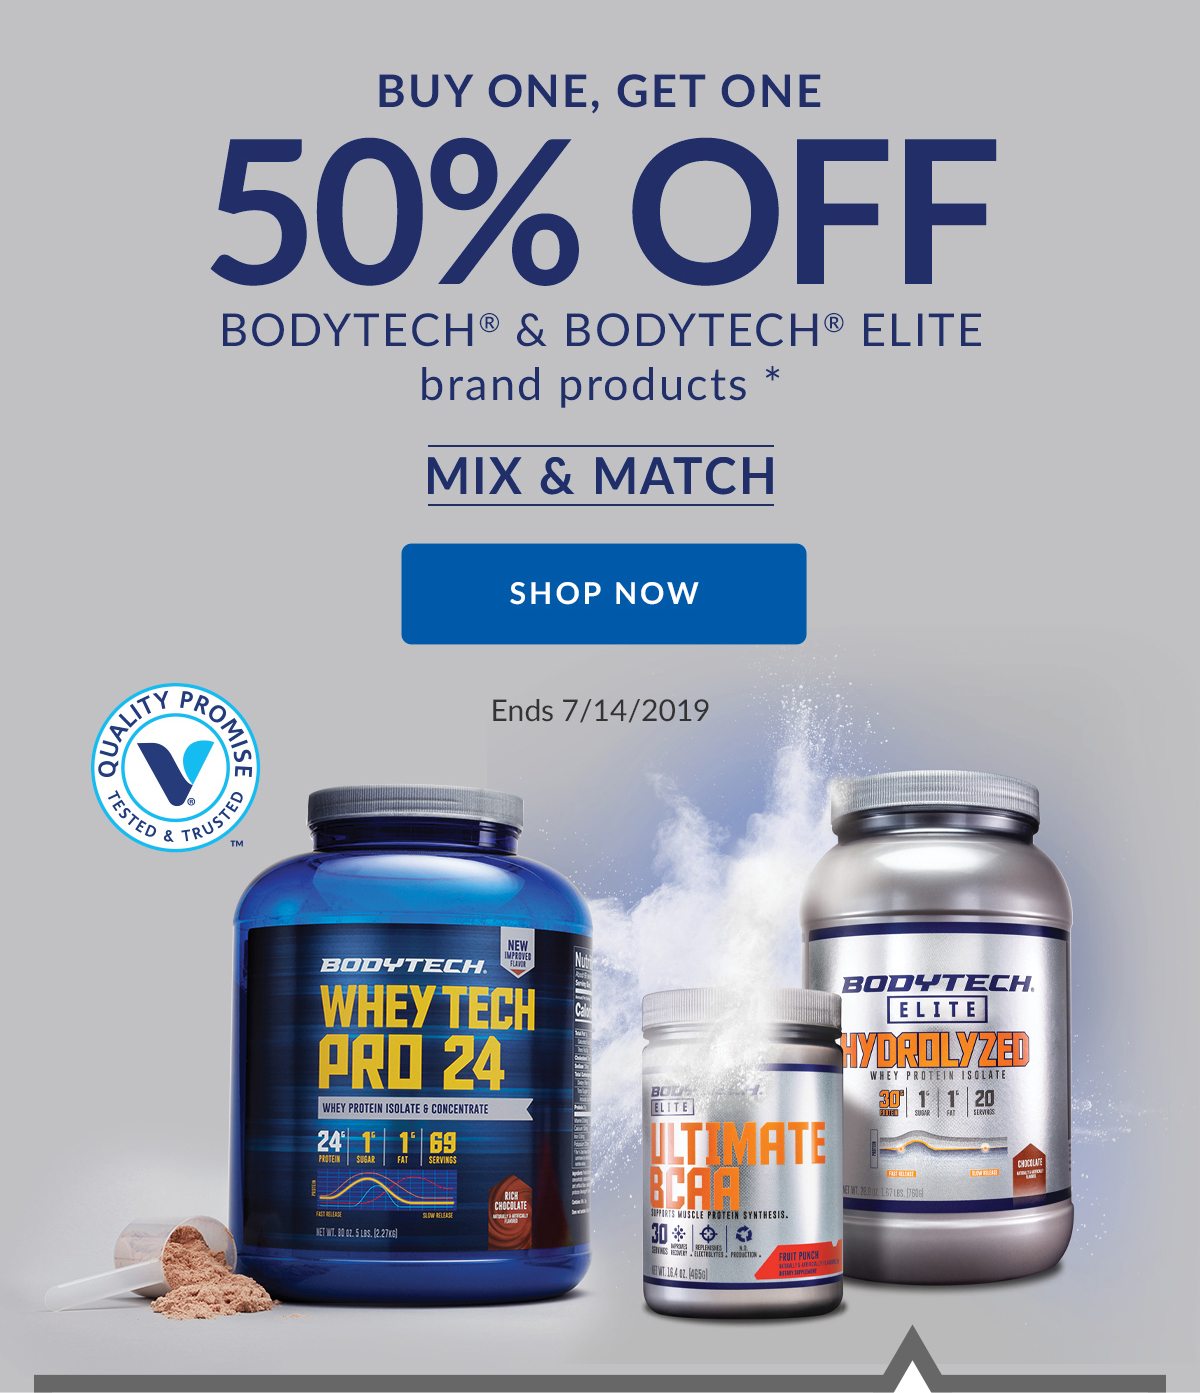 BUY ONE, GET ONE 50% OFF BODYTECH & BODYTECH ELITE brand products * | MIX & MATCH | SHOP NOW | Ends 7/14/2019